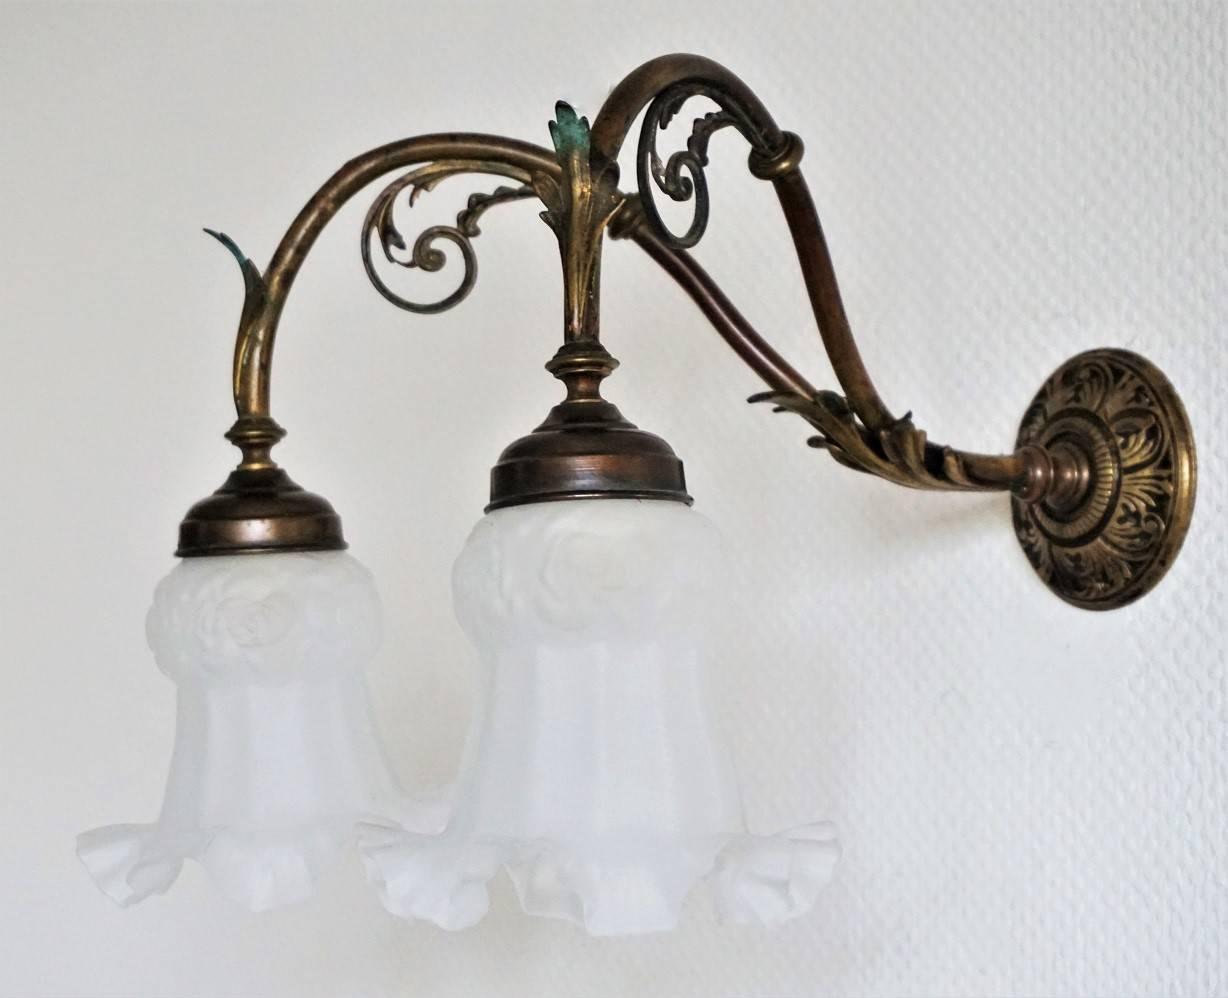 A lovely Art Nouveau bronze and brass two-light wall sconce decorated with foliage, frosted art glass shades, circa 1900-1910, with wonderful patina. The wall sconce has been rewired.
Measures: Width: 15.75 in (40 cm)
Depth: 15.75 in (40